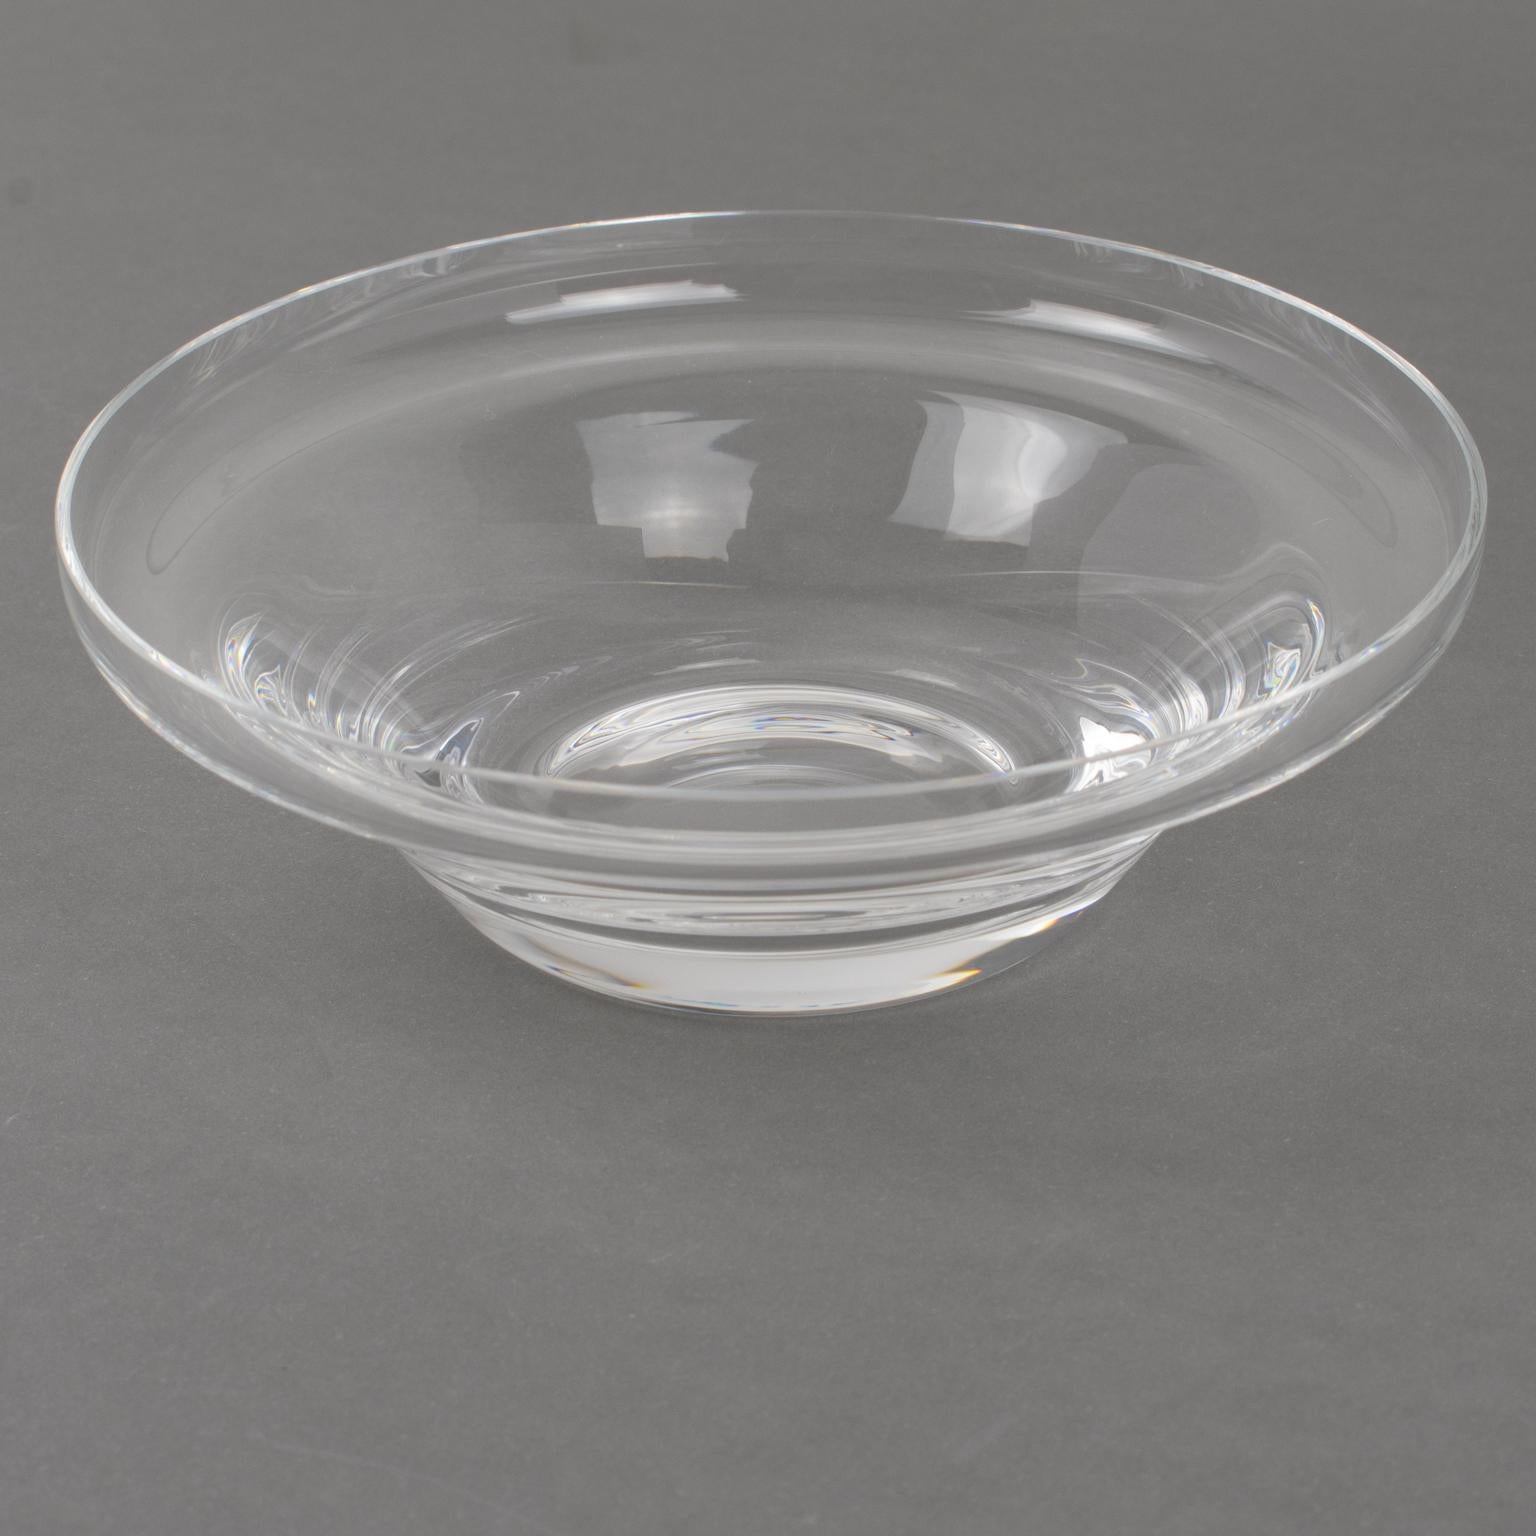 Silver Plate and Crystal Caviar Bowl Dish Server by St Hilaire, Paris 8